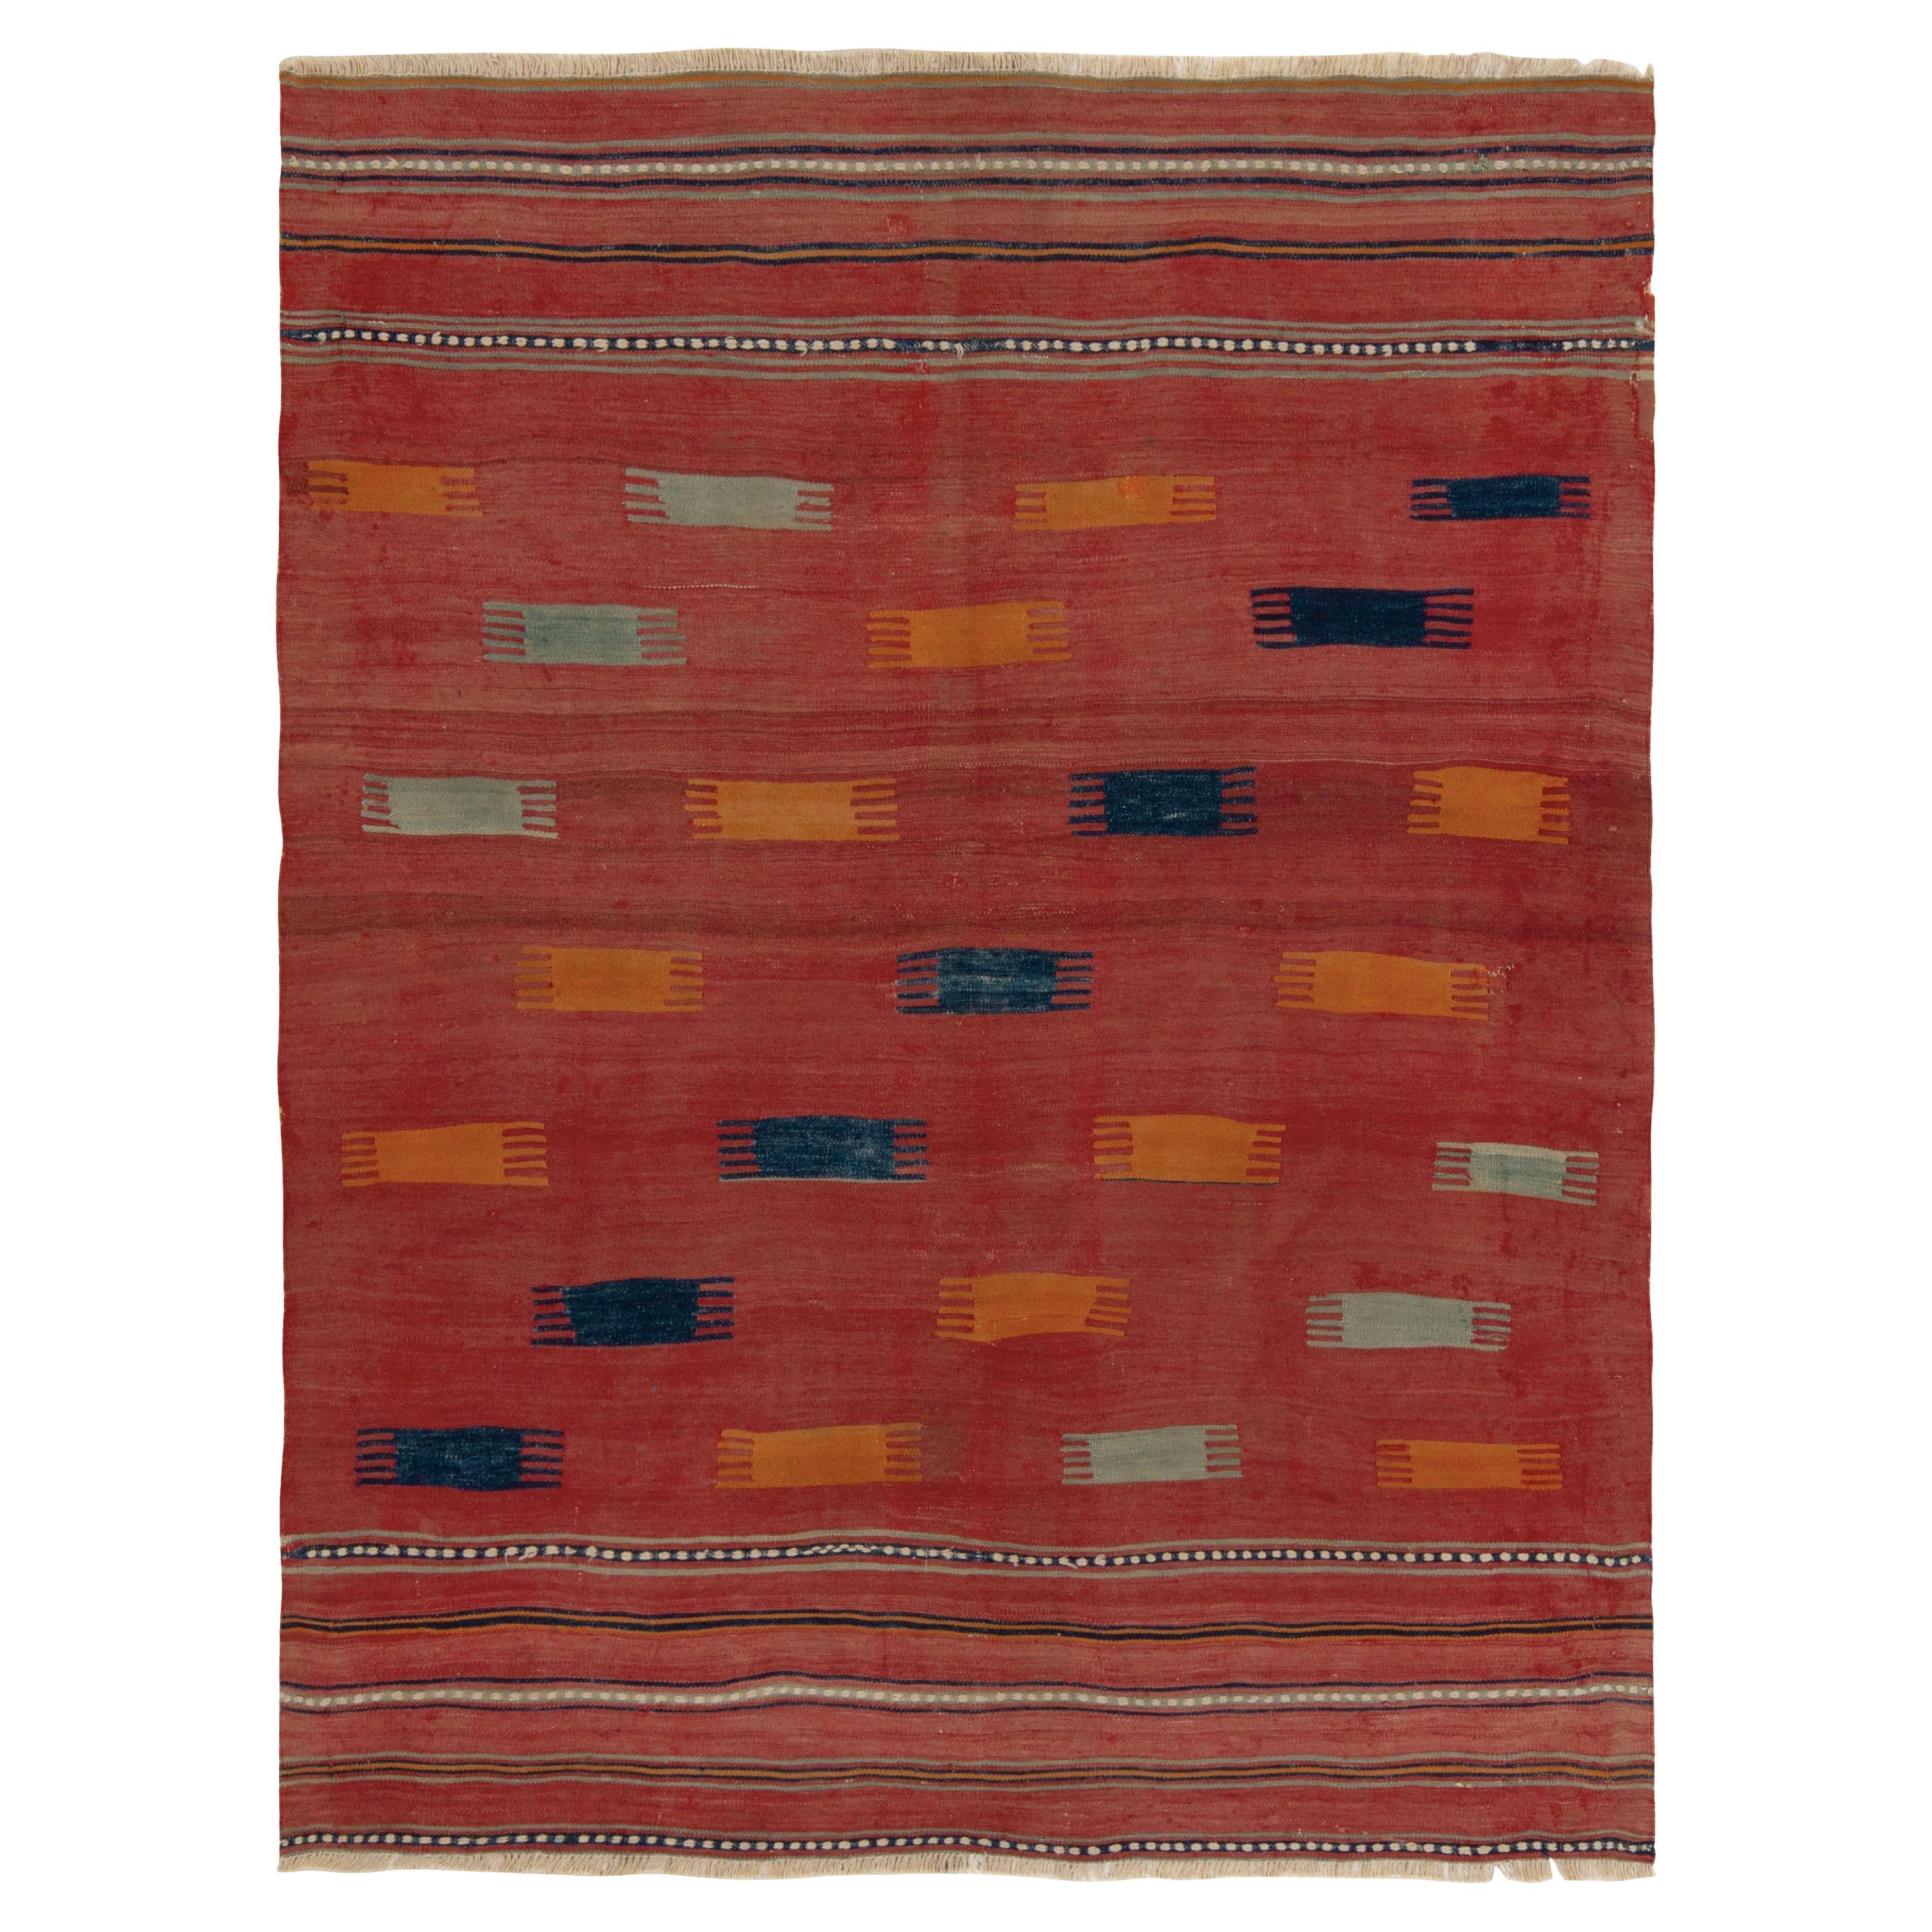 Antique Tribal Kilim rug in Red, Blue Tribal Geometric Pattern by Rug & Kilim For Sale